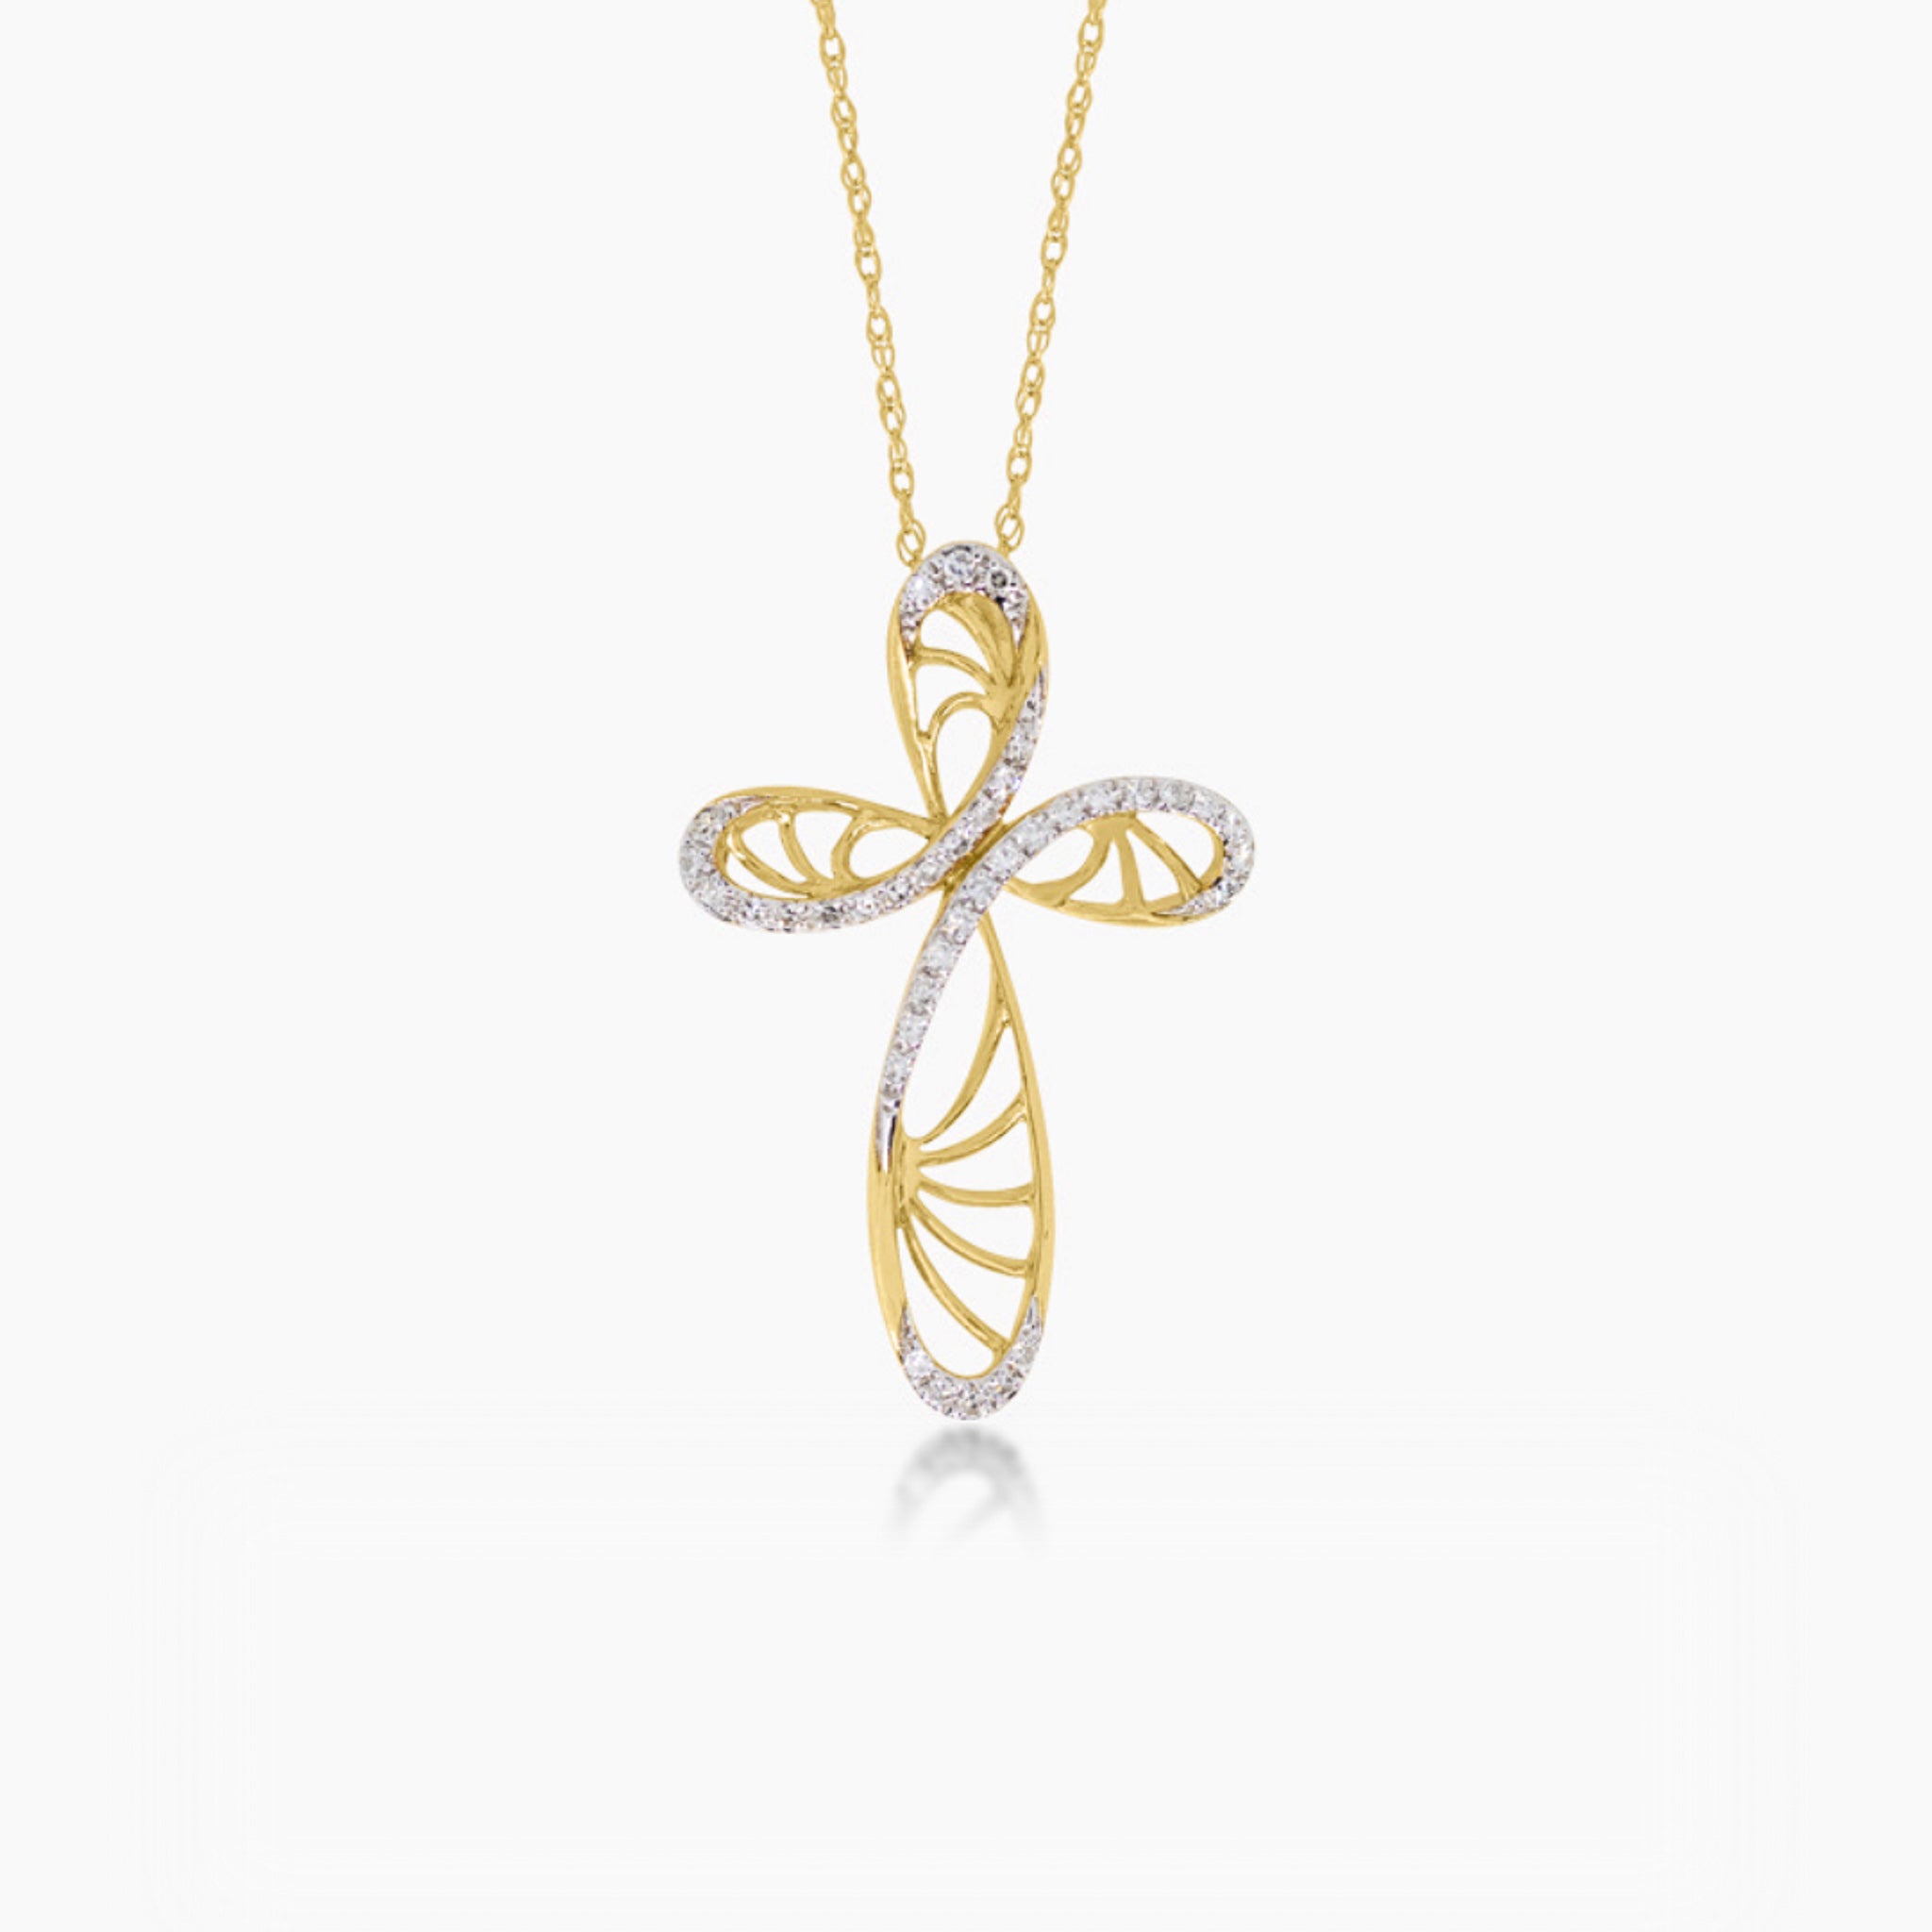 14K YELLOW GOLD ANGEL'S TOUCH DIAMOND CROSS NECKLACE